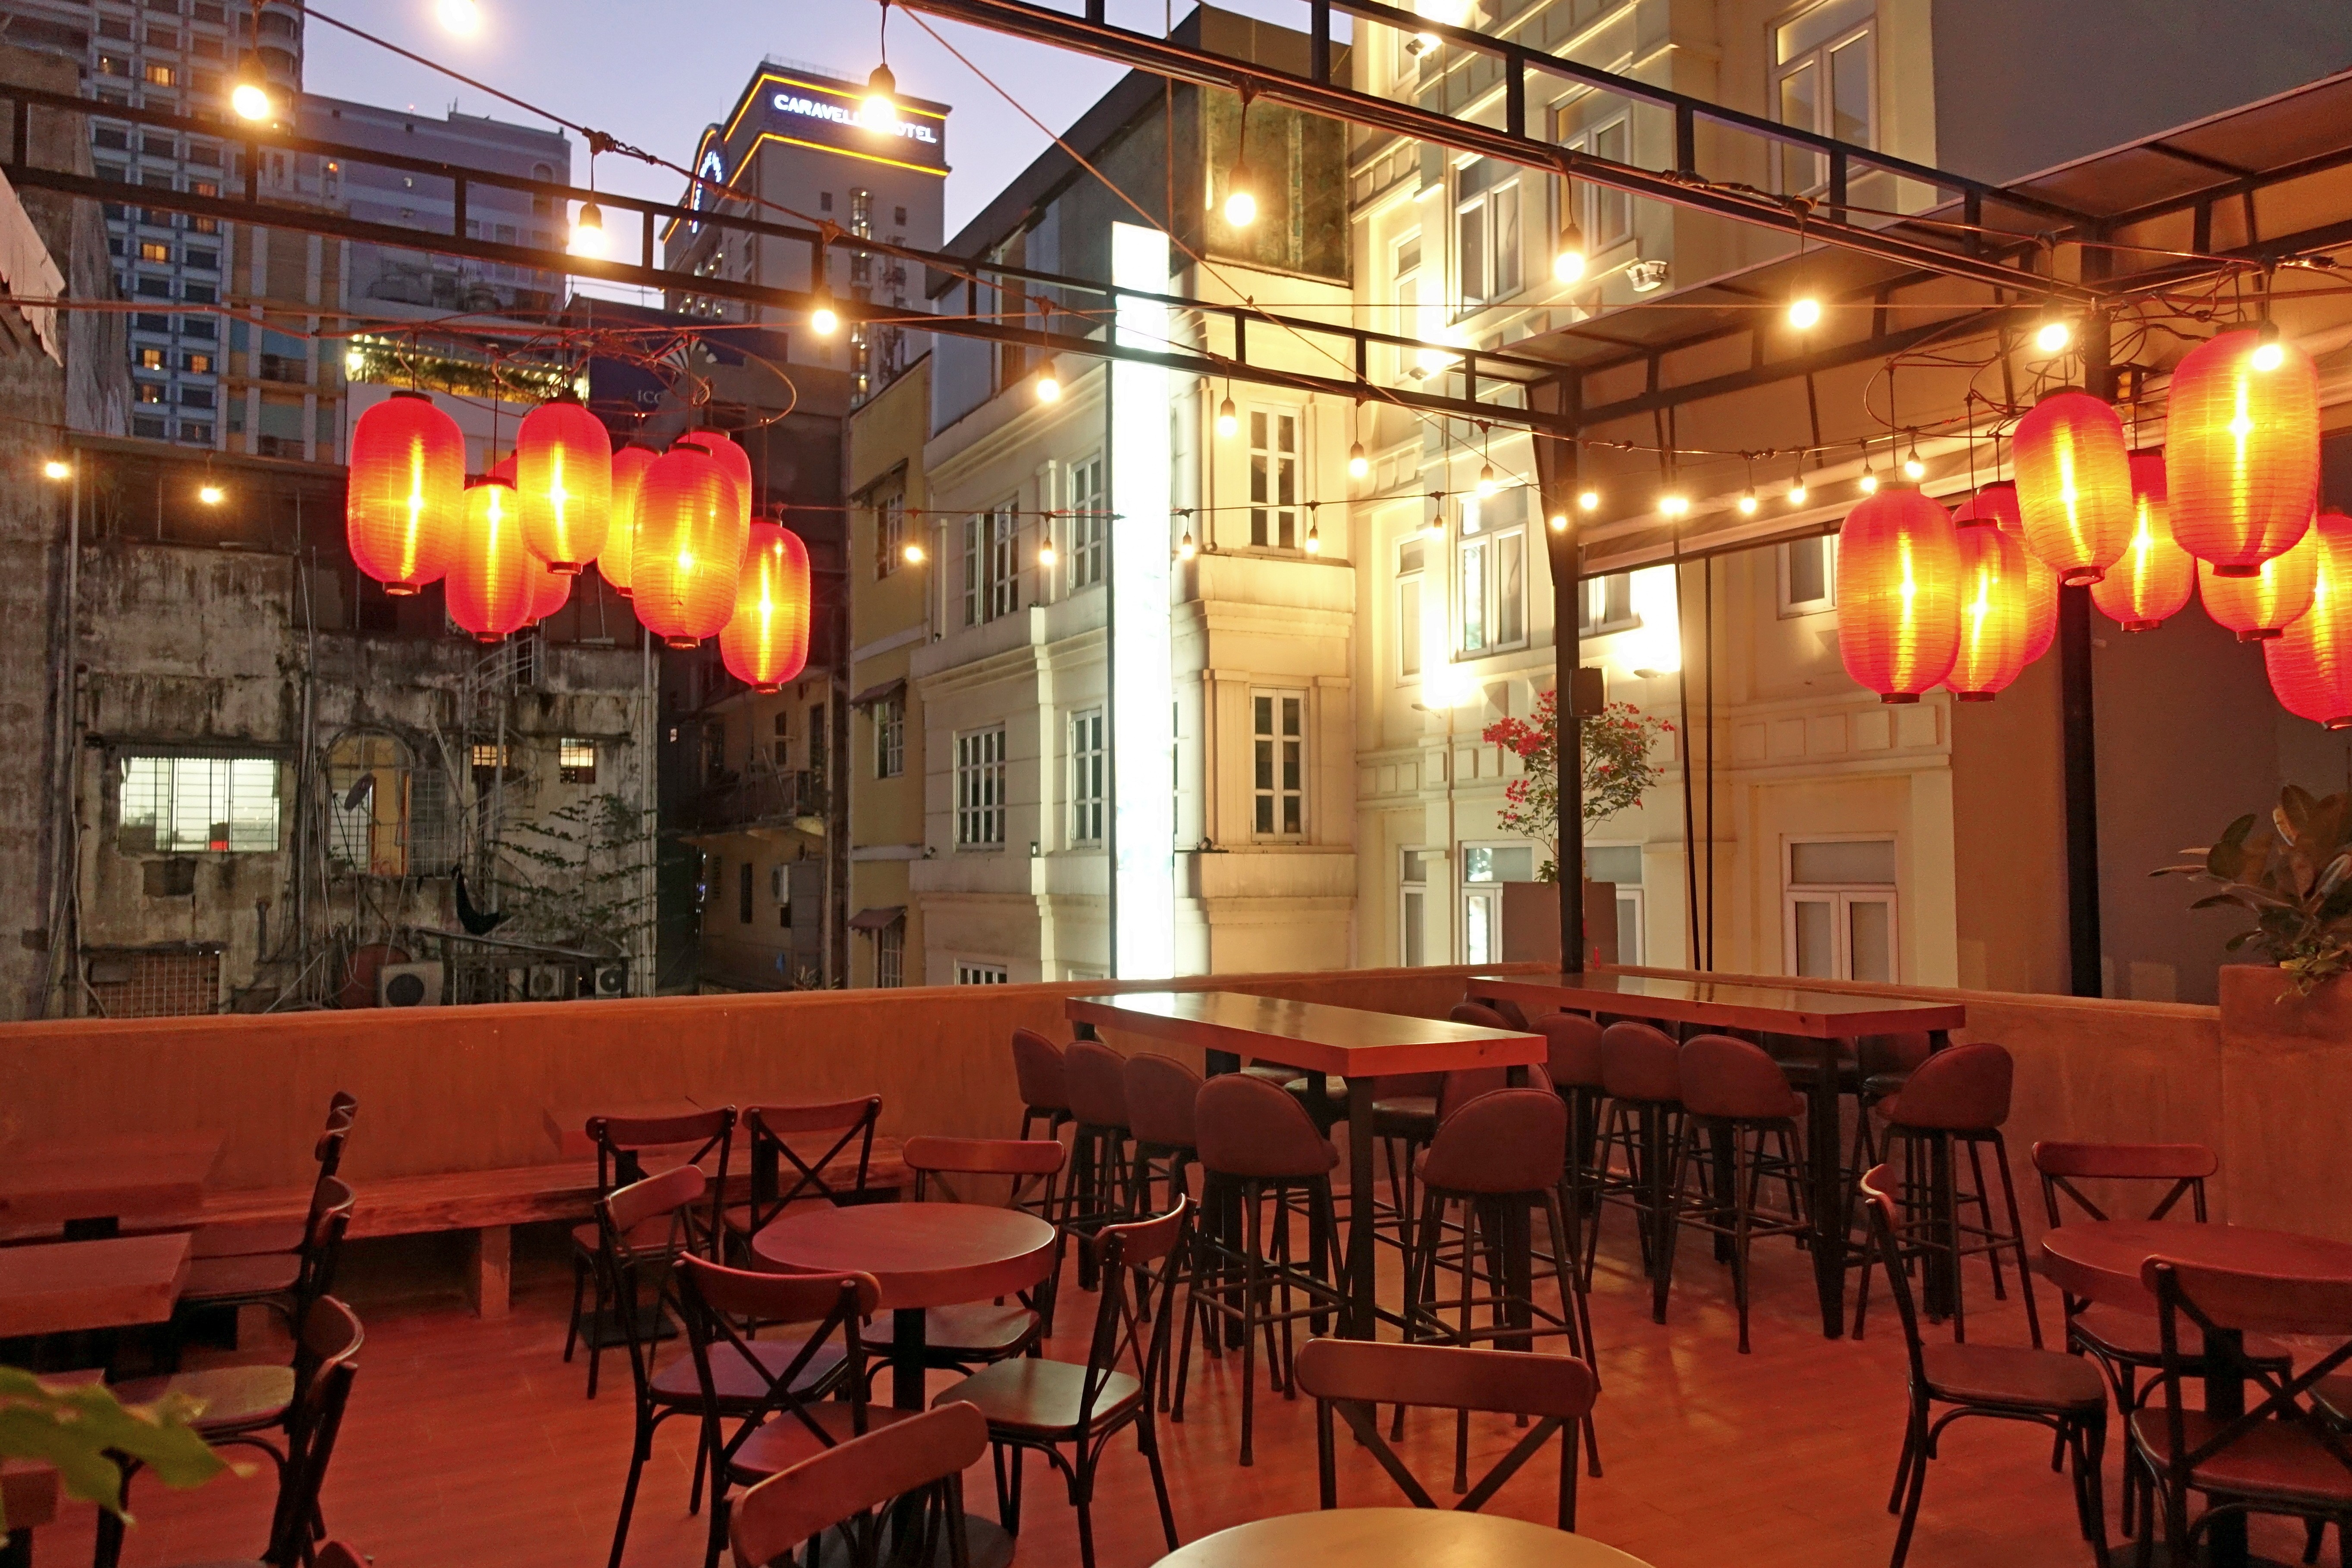 Knick Knack, in Ho Chi Minh City’s District 1, is a three-storey venue combining hip restaurant, bar and rooftop space.